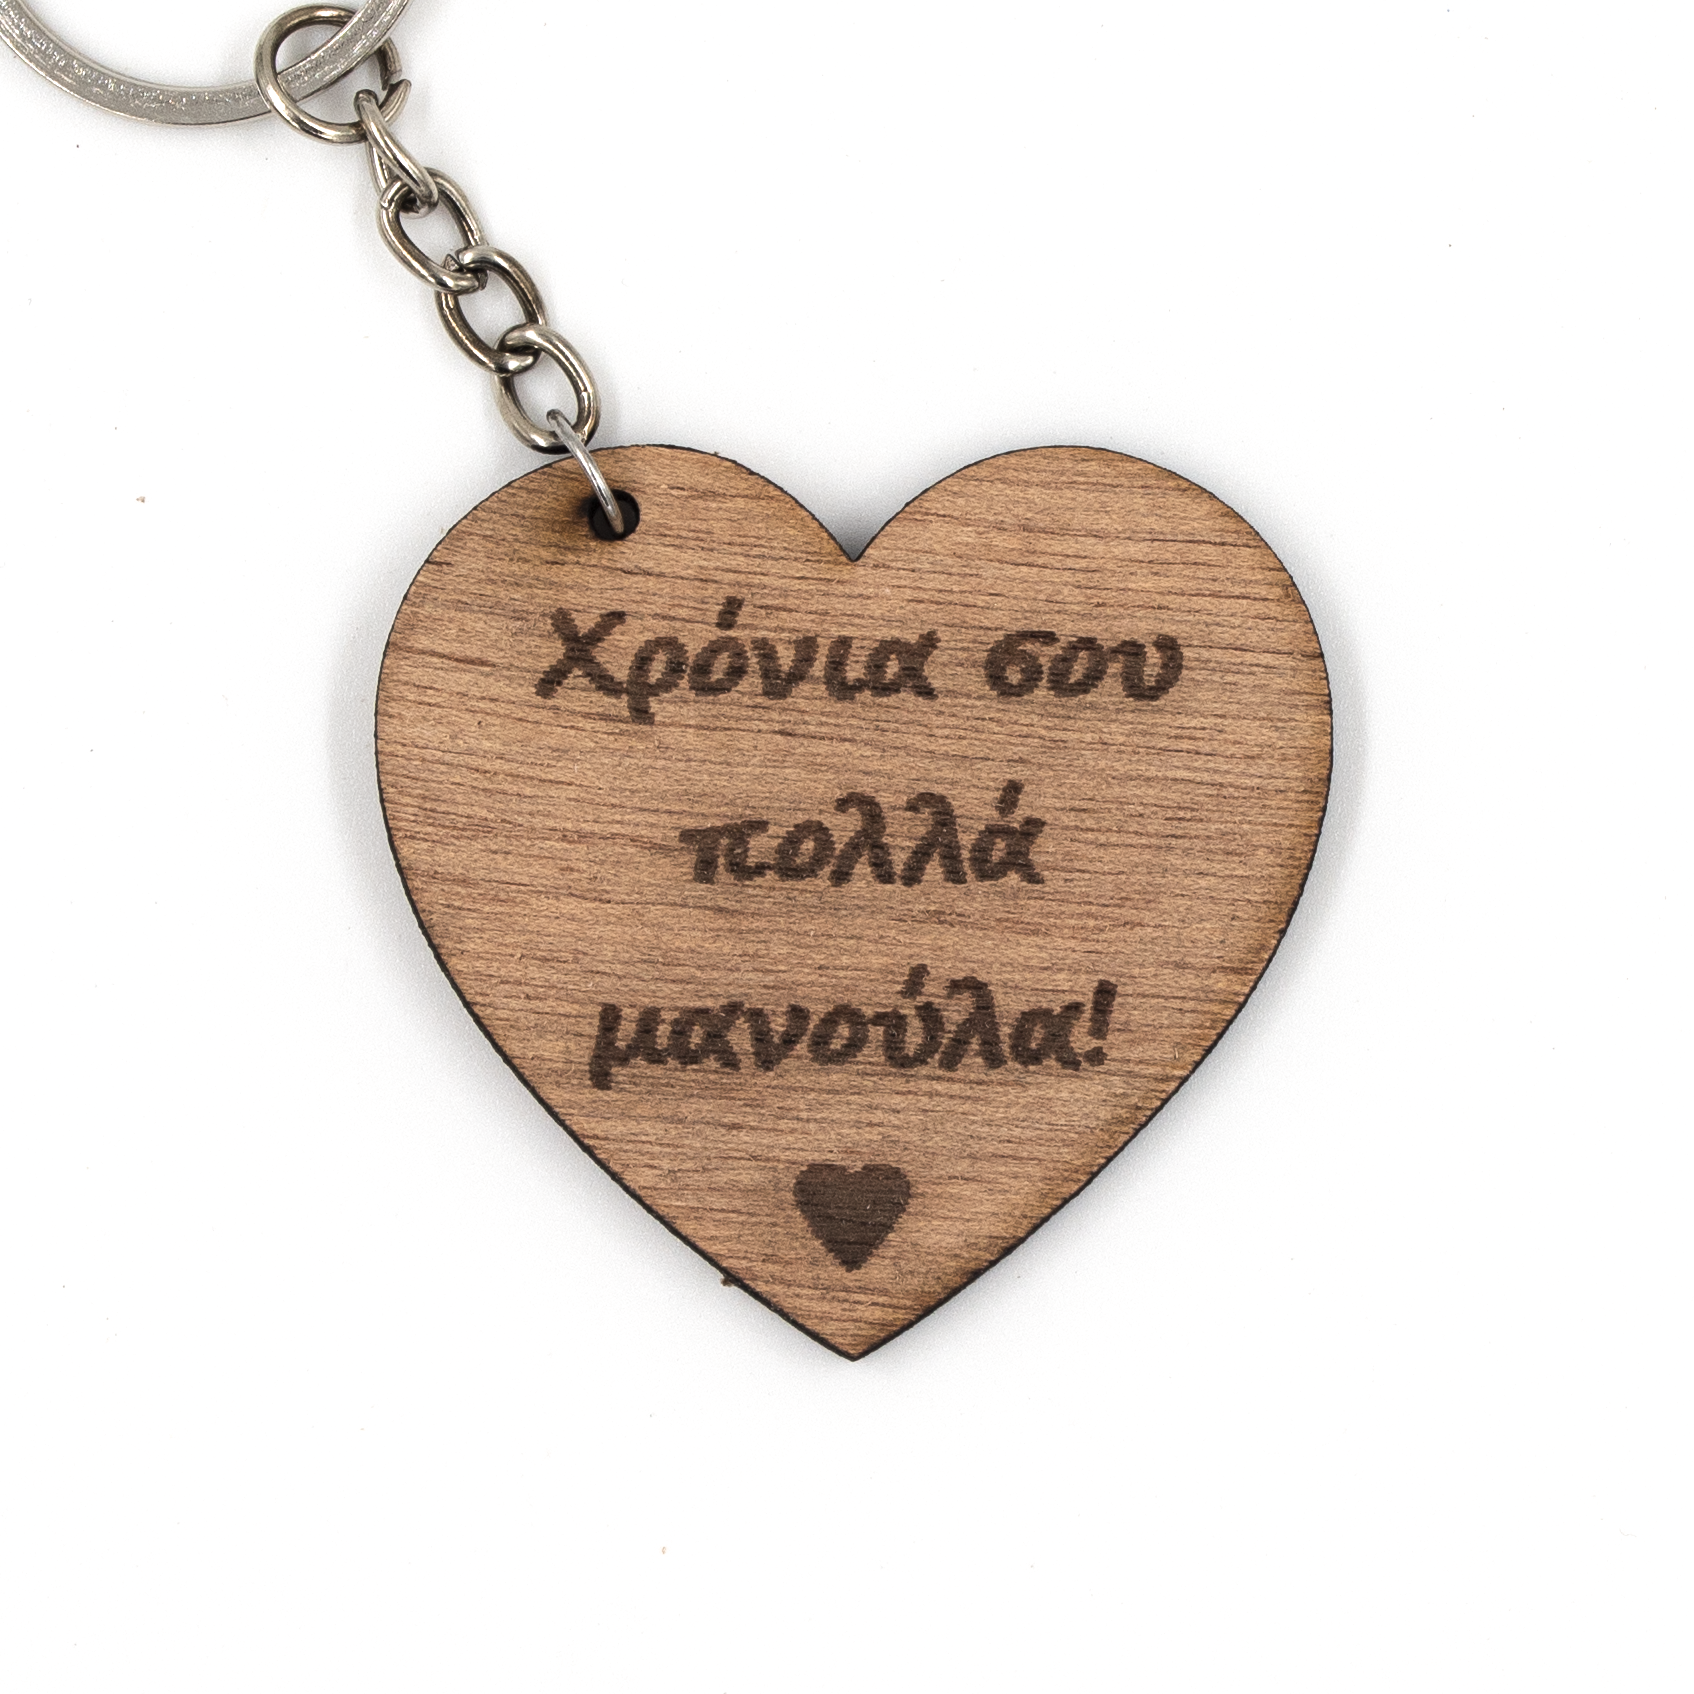 Wooden Mother's Day Keyring with Heartfelt Message and Elegant Design - Perfect Gift for Mom to Use on Keys, Purse or Bag - High-Quality and Durable